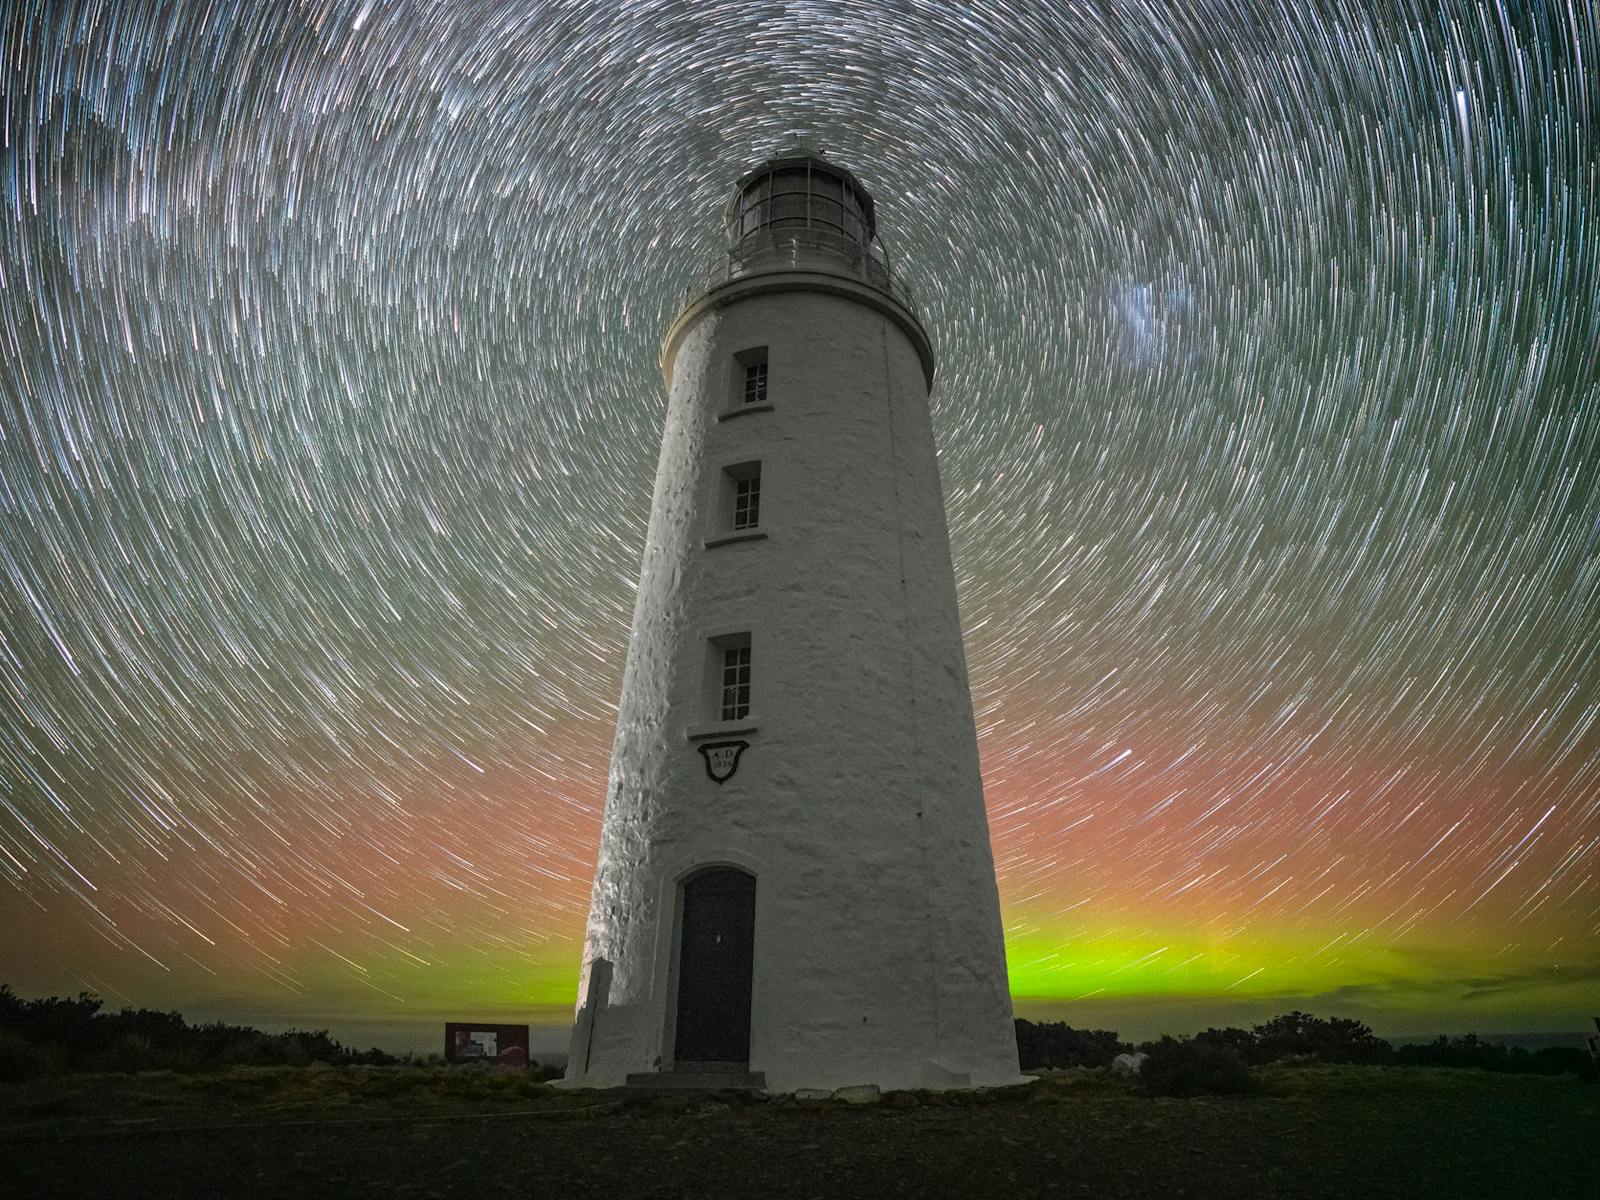 Cape Bruny Lighthouse star trail back-lit with Aurora australis